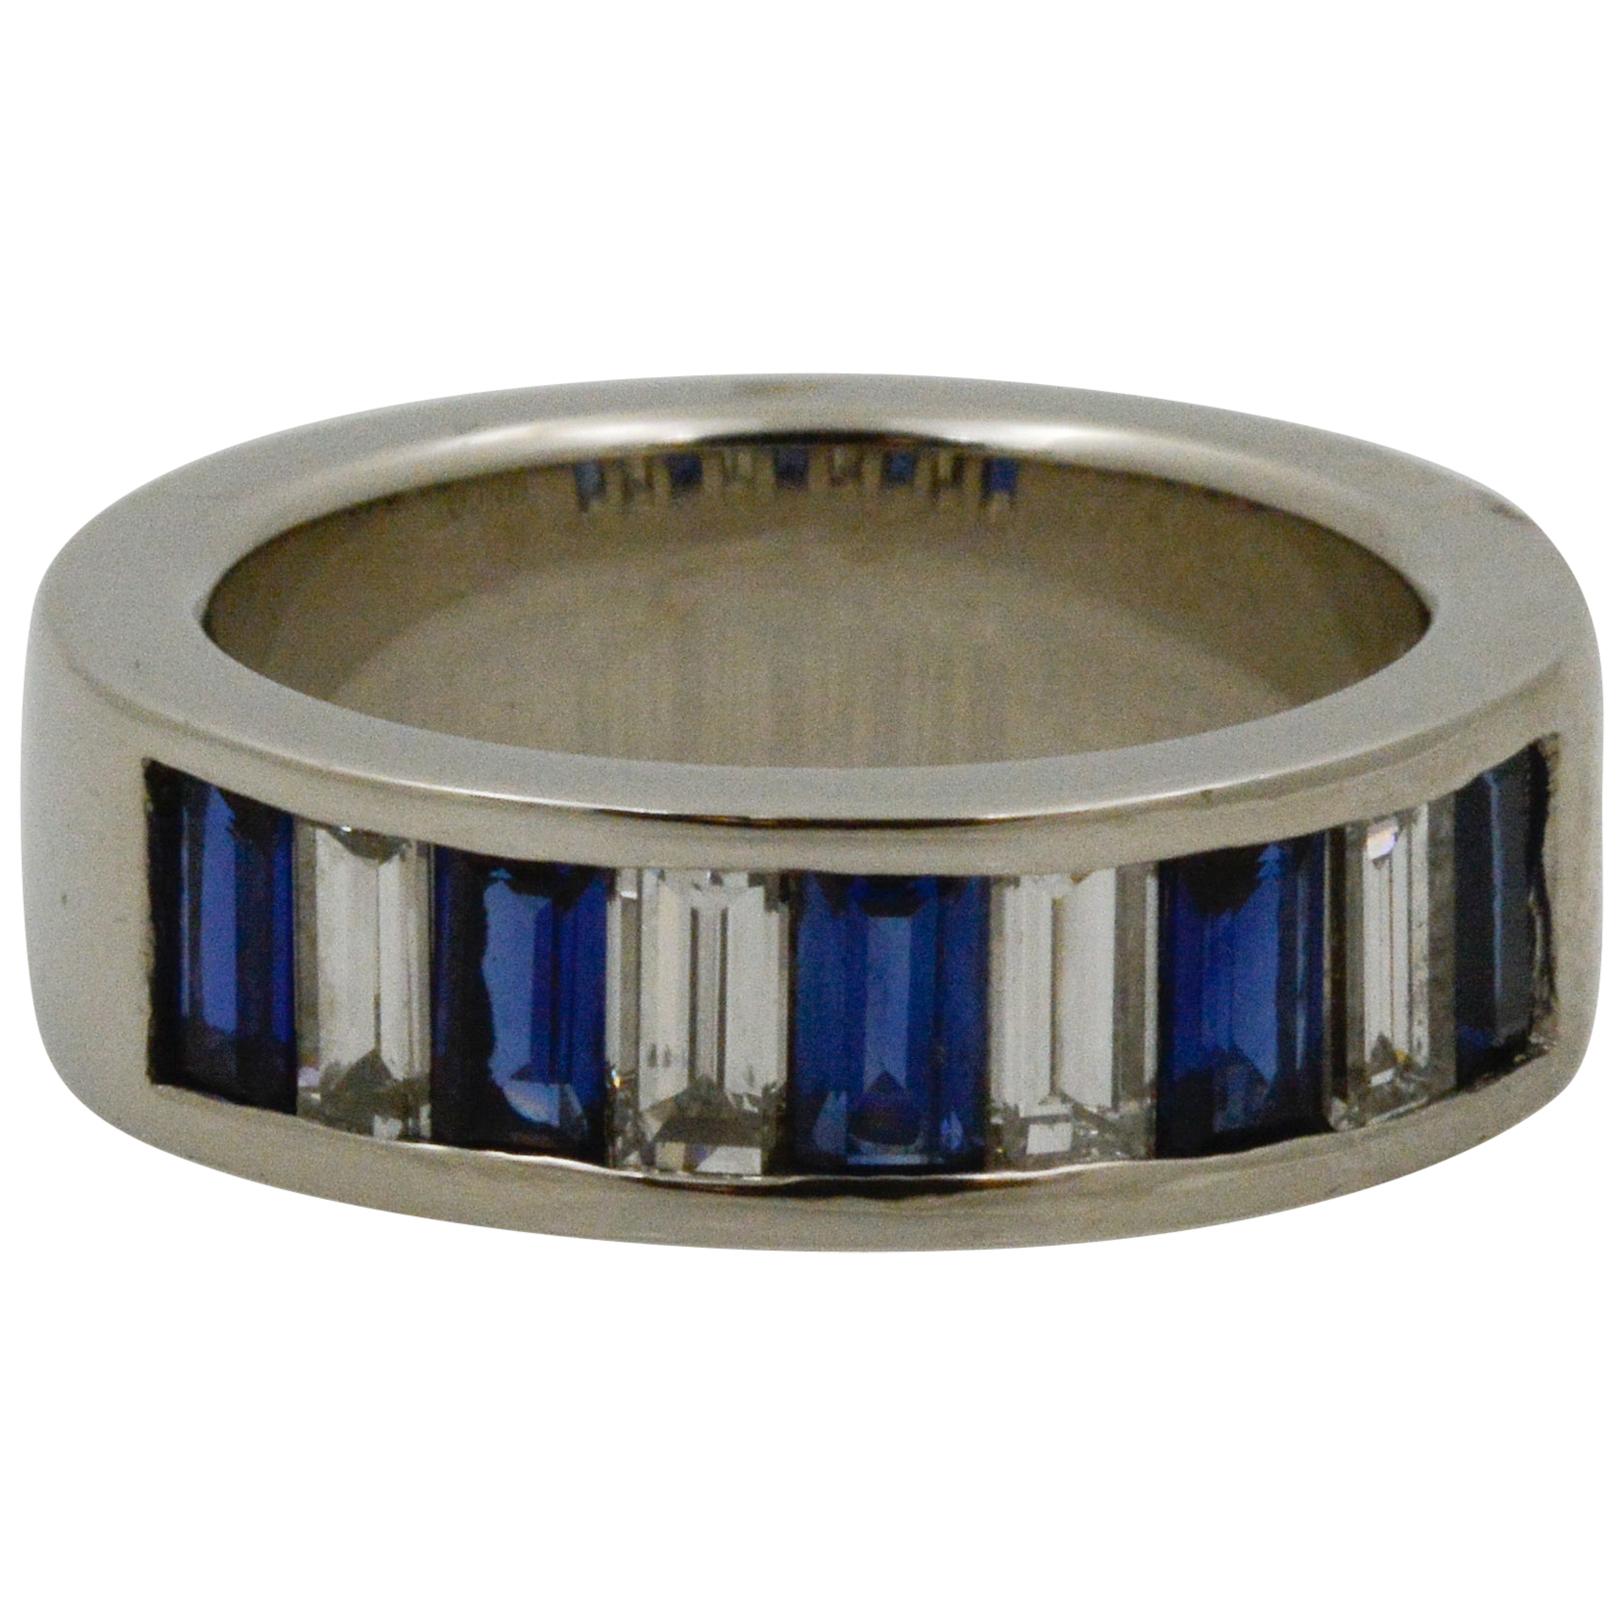 This platinum band ring features four baguette diamonds weighing an approximate combined 0.84 carats with FG coloring and VS clarity, and five baguette blue sapphires weighing an approximate combined 1.30 carats. The ring is a size 6. 